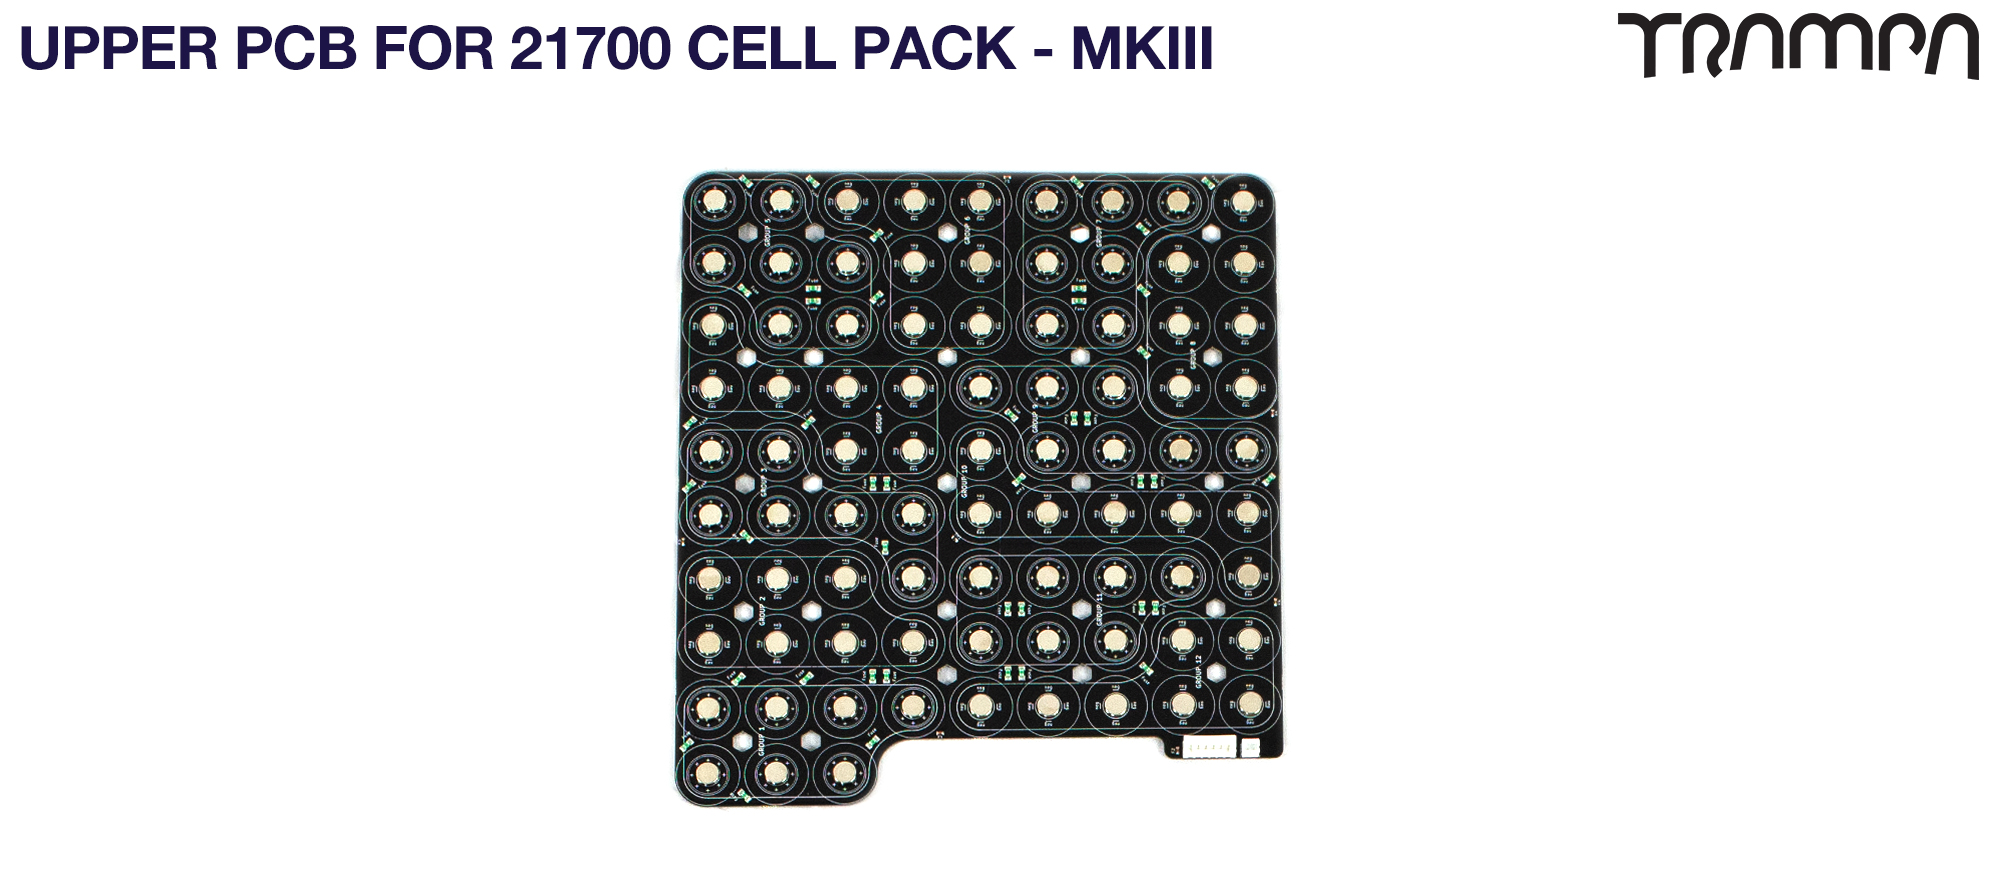 UPPER PCB for 21700 Cell Pack - fits TRAMPA's MkIII Massive MONSTER Box 